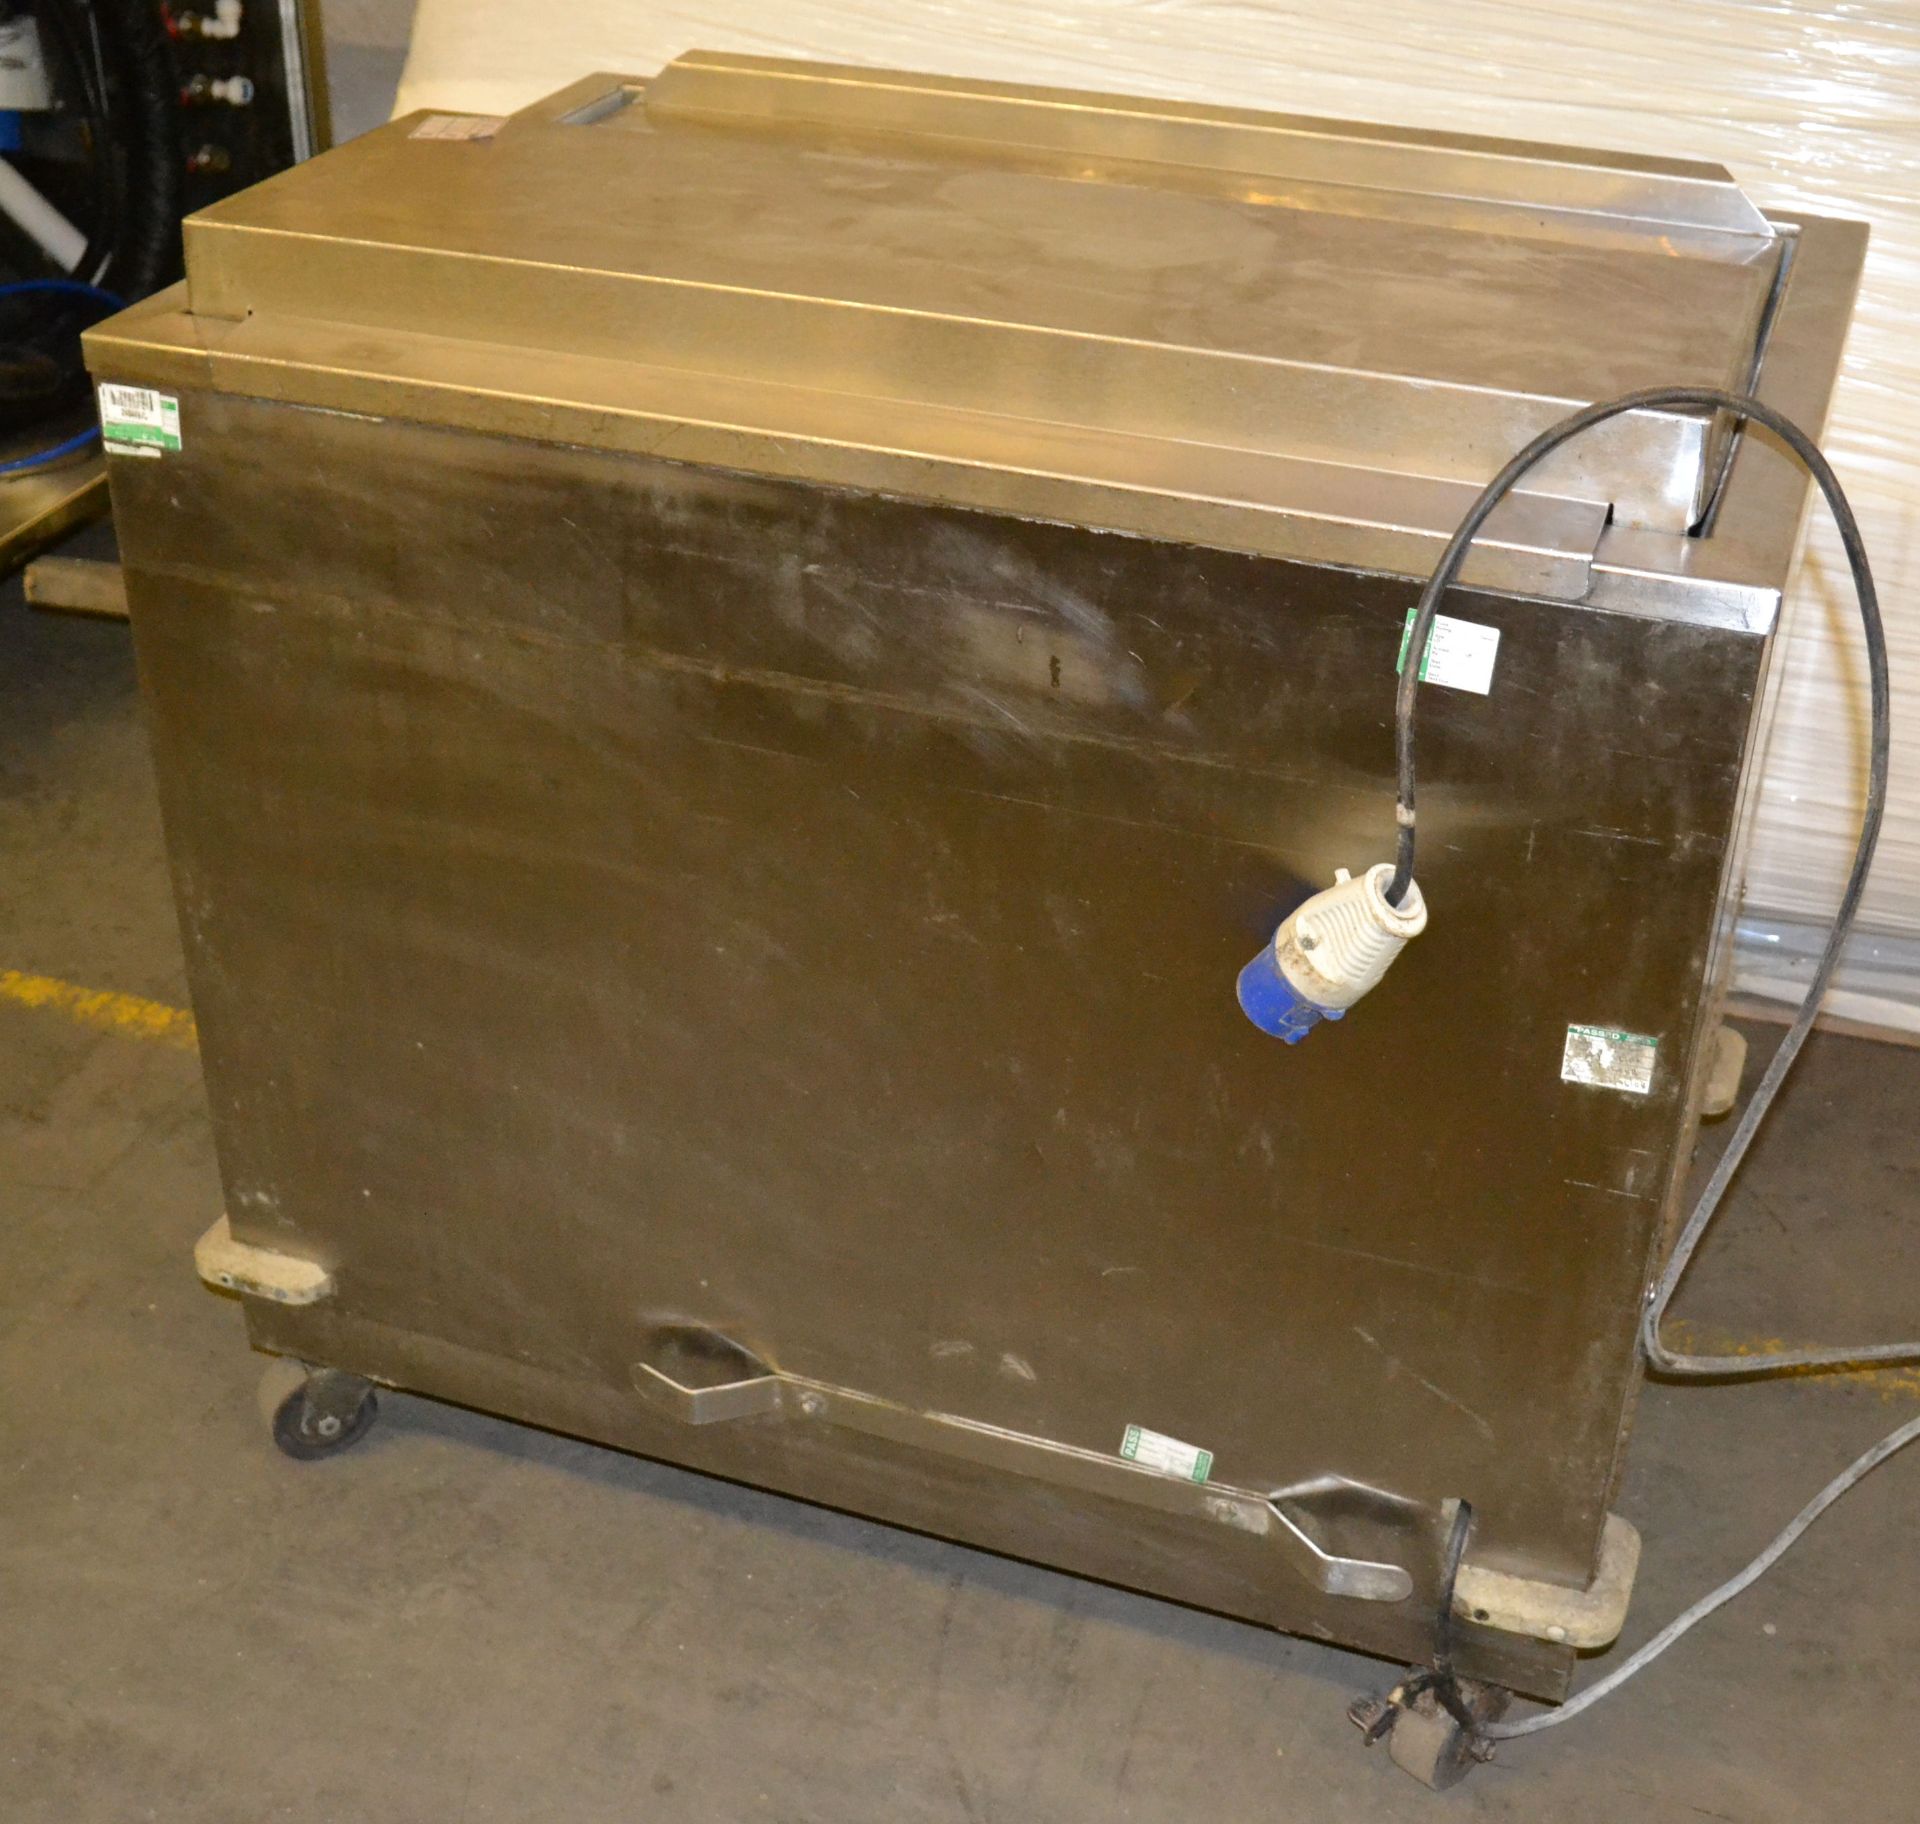 1 x Top Loading Chiller on Wheels - Ref:NCE030 - CL007 - Location: Bolton BL1 Approximate dimension - Image 6 of 8